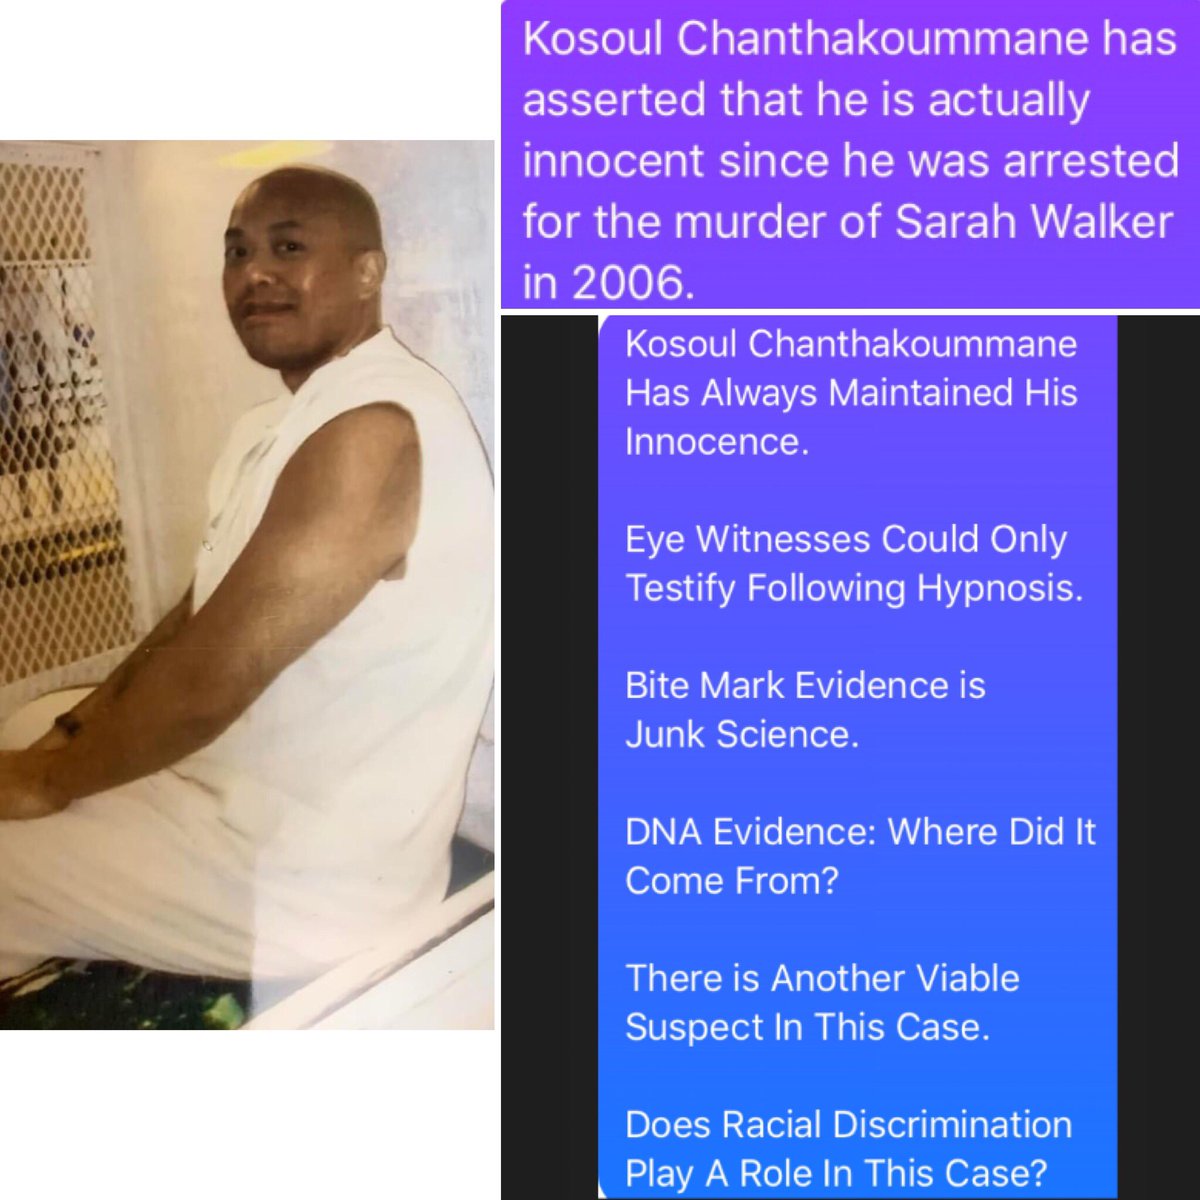 #Texas : #deathpenalty - 

EXECUTION ALERT -

Stop execution of #KosoulChanthakoummane 

Sign the petition: actionnetwork.org/petitions/stop…

Take action, here: catholicsmobilizing.org/action/2022-07…

Execution : August 17th 

@GovAbbott @GregAbbott_TX